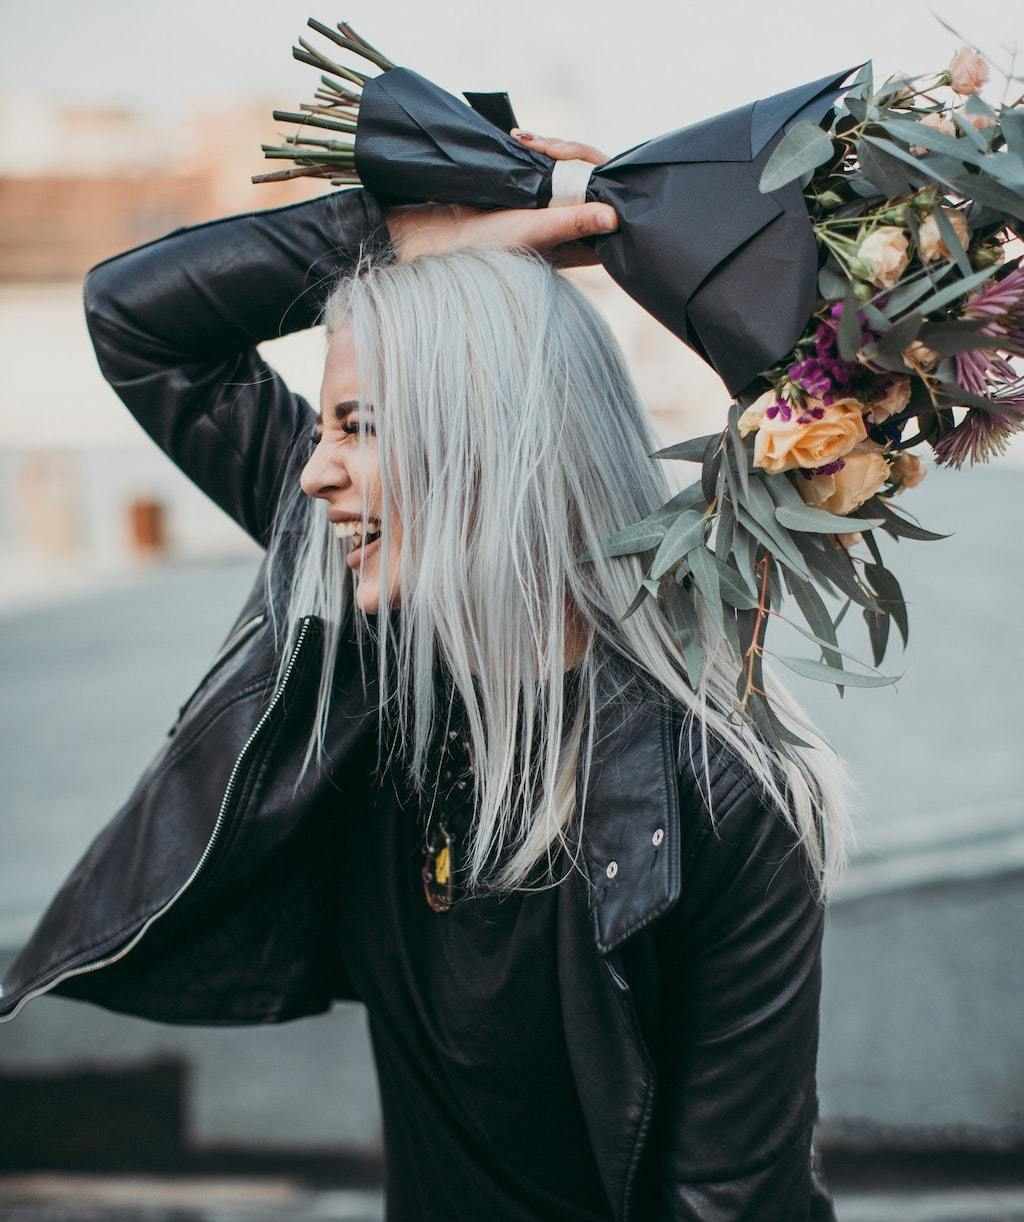 Hair silver color Blondierung Haarpflege Leather jacket combining Herbst Outfit